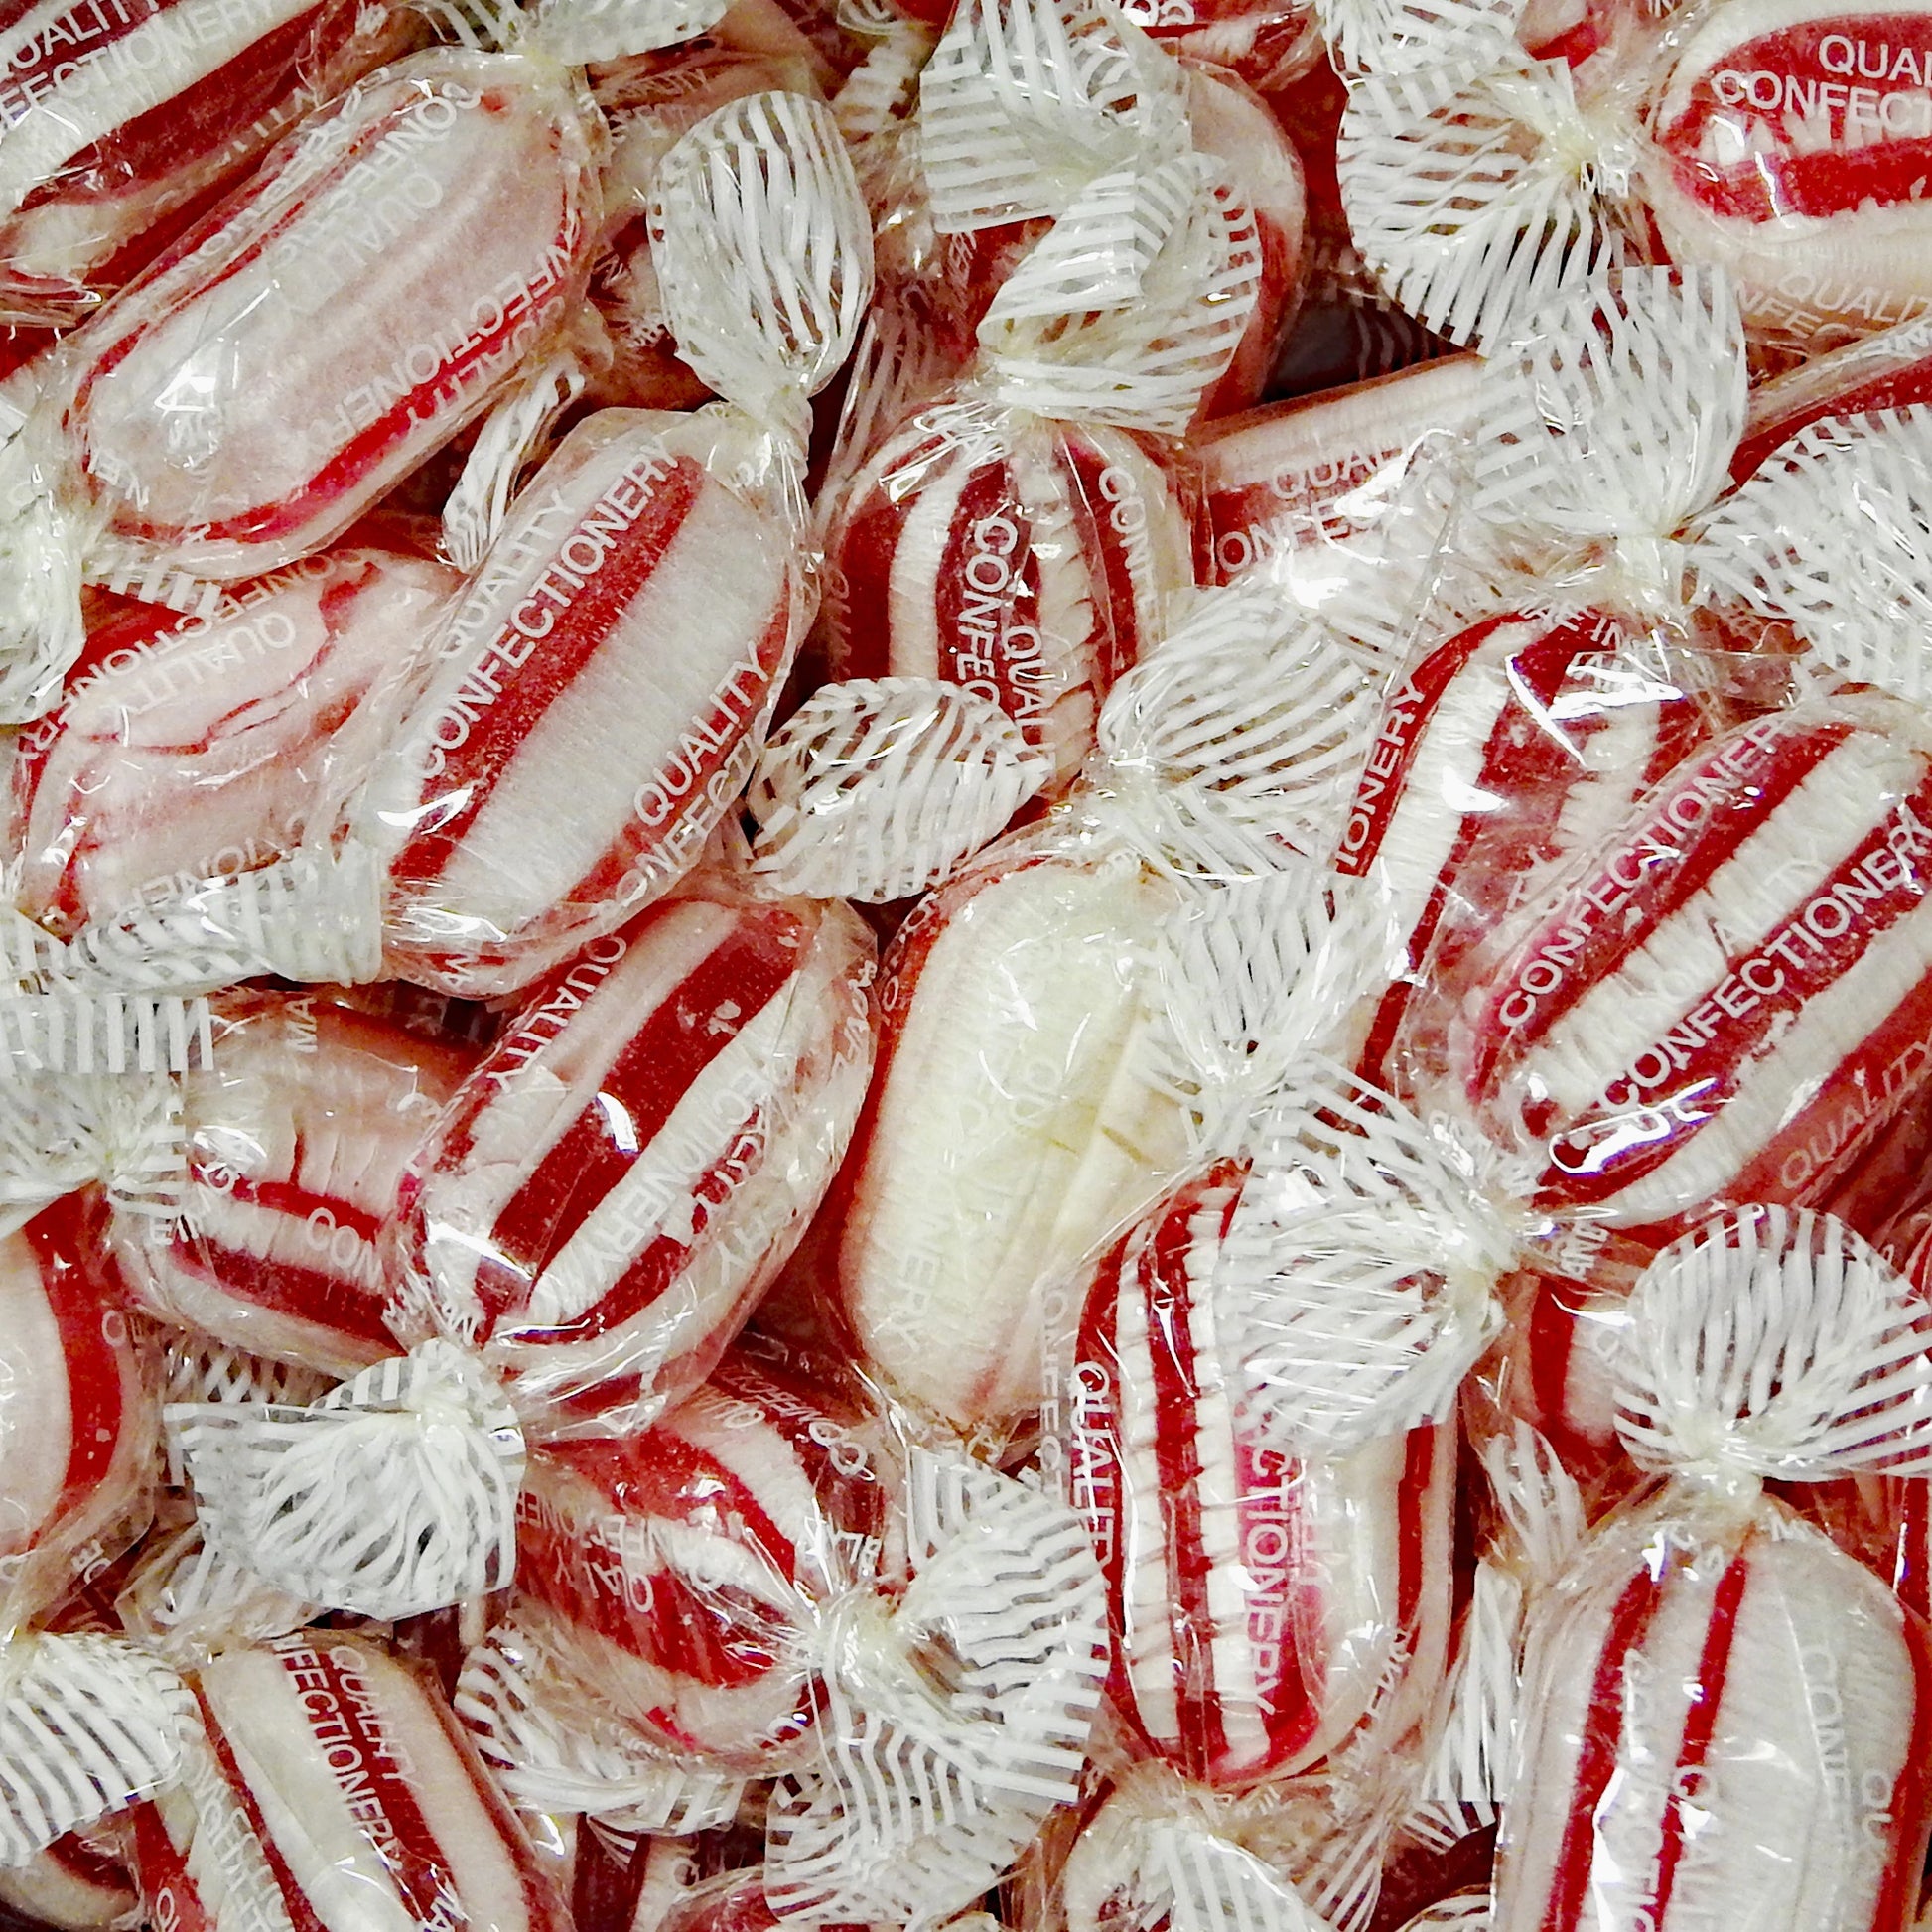 Clove Drops - Retro Sweets at The Sweetie Jar